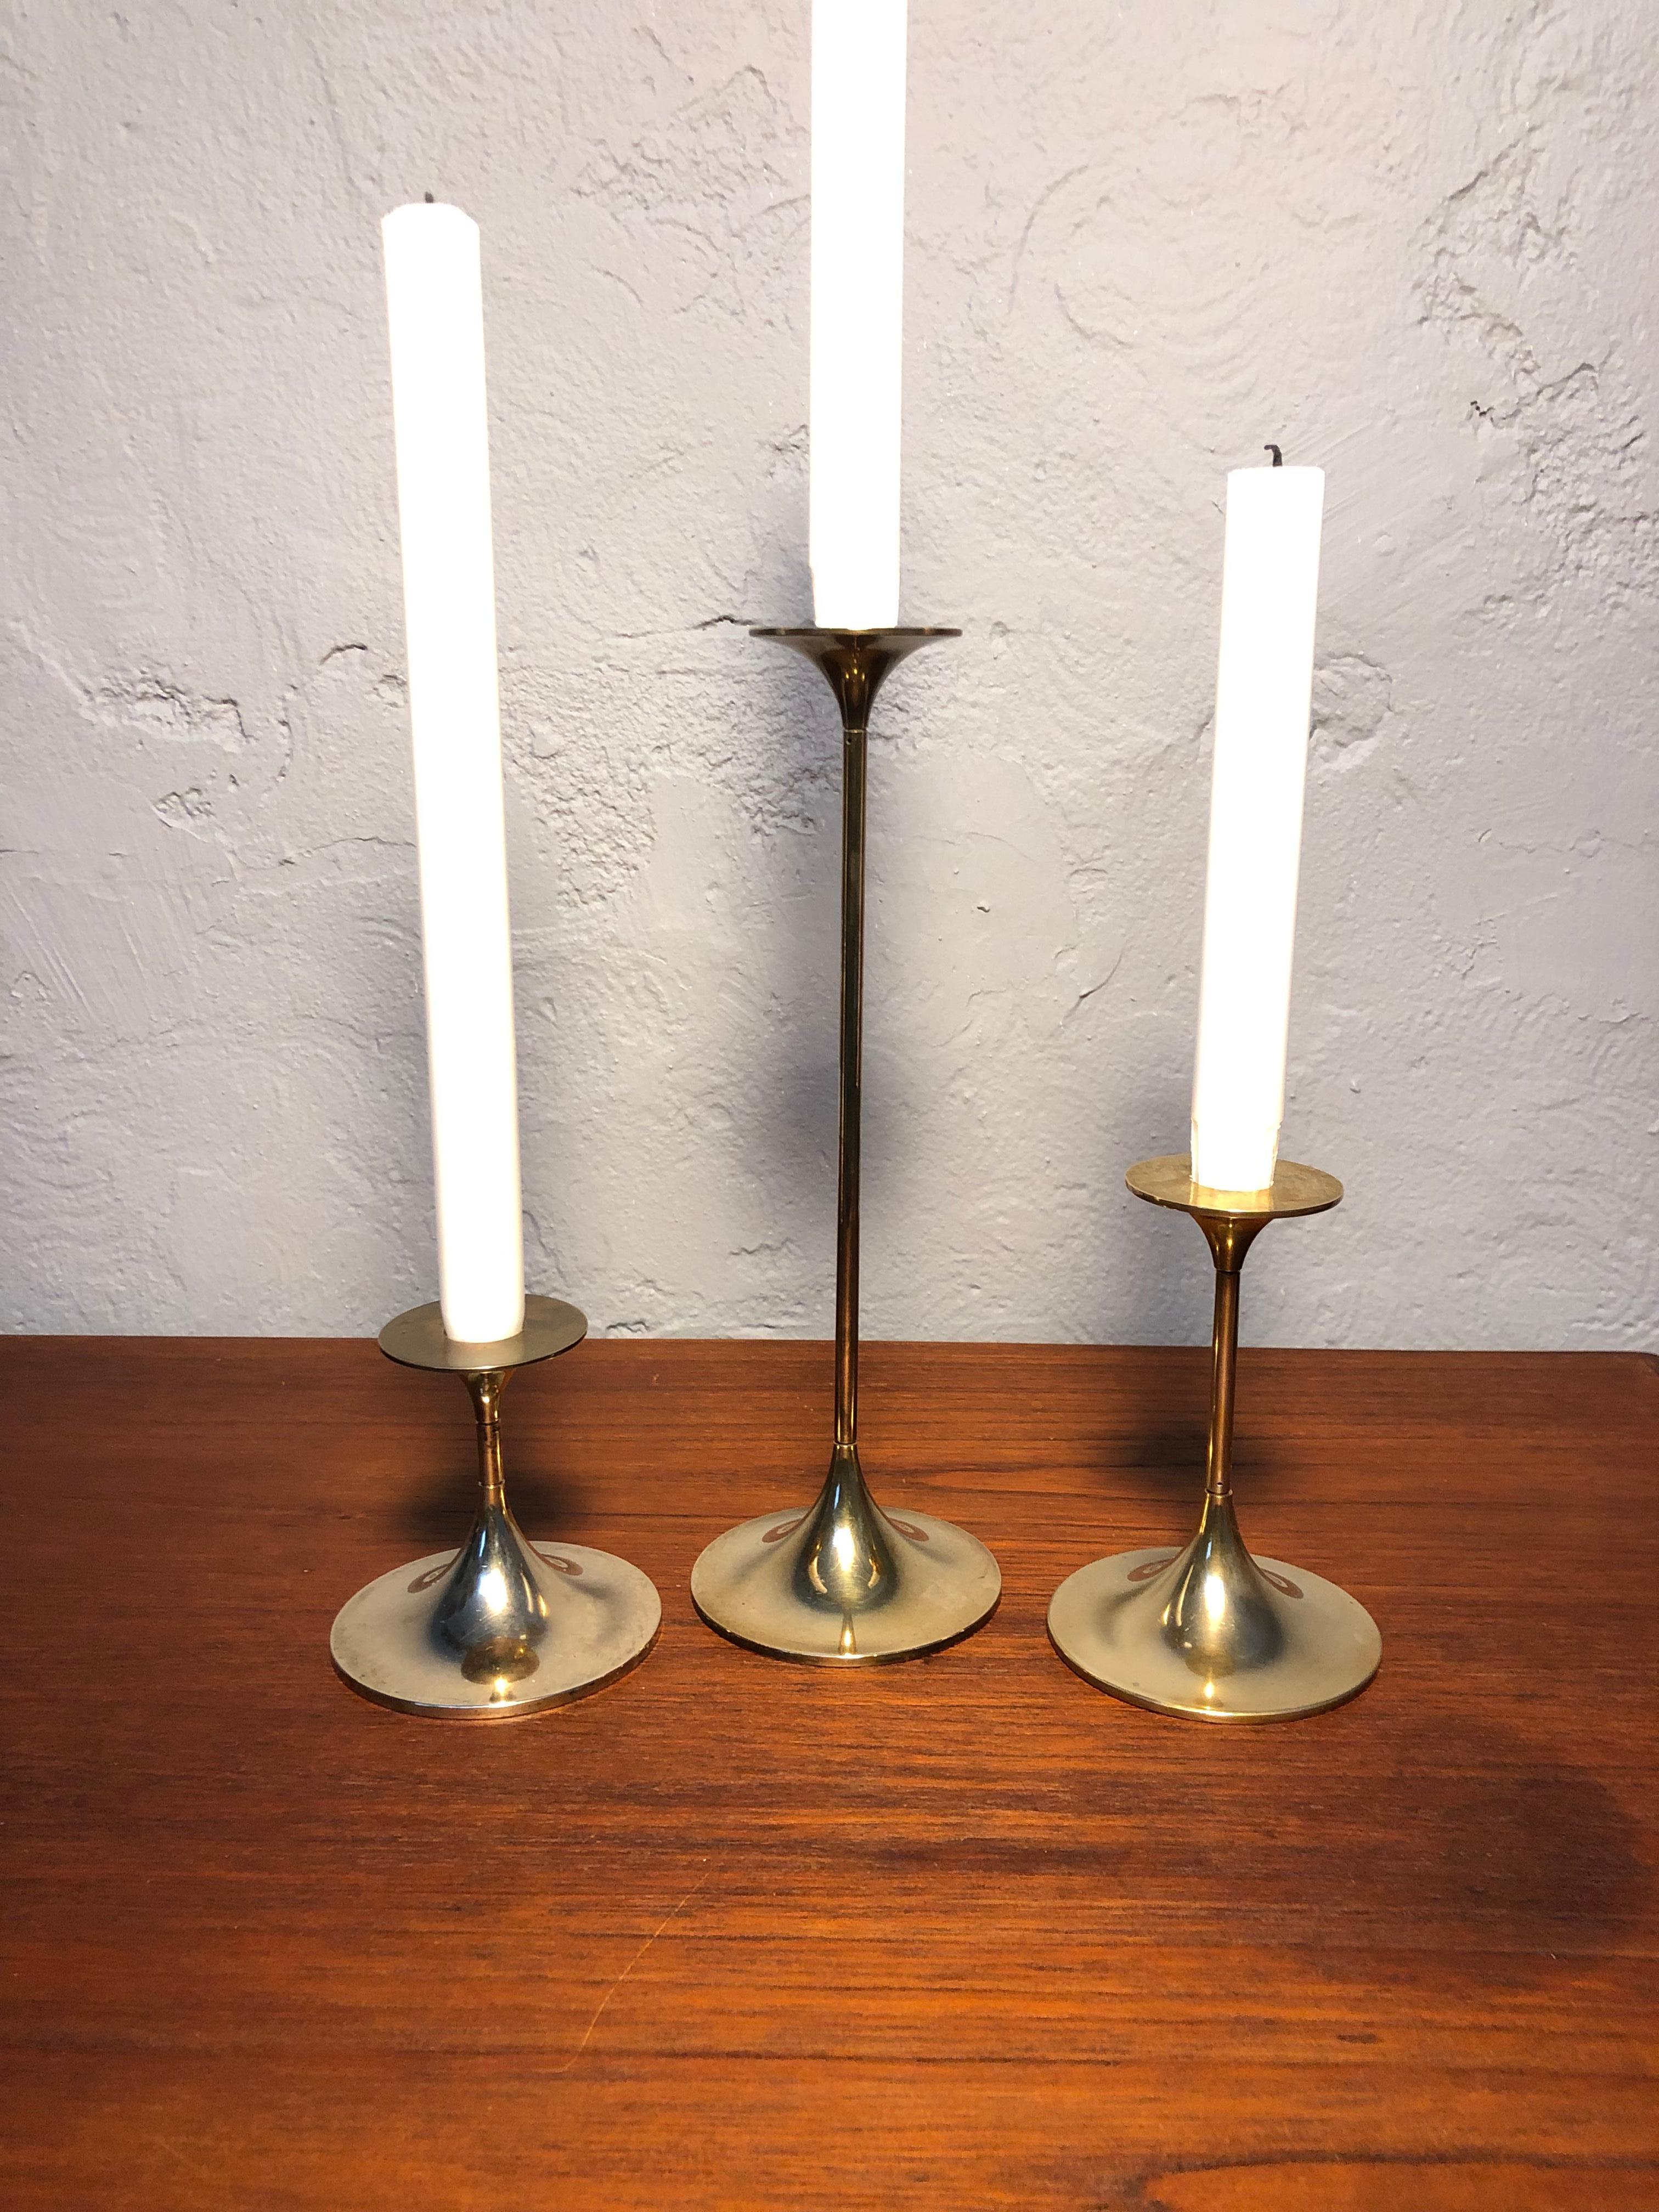 A set of 3 Mid-Century Modern brass candle holders by Torben Ørskov of Copenhagen. 
Three heights 9, 13 and 26cm. 
Stamped at the base and top “TØ made in Denmar“
Can be polished if so desired. 
Age related wear and patina.
Great mid century